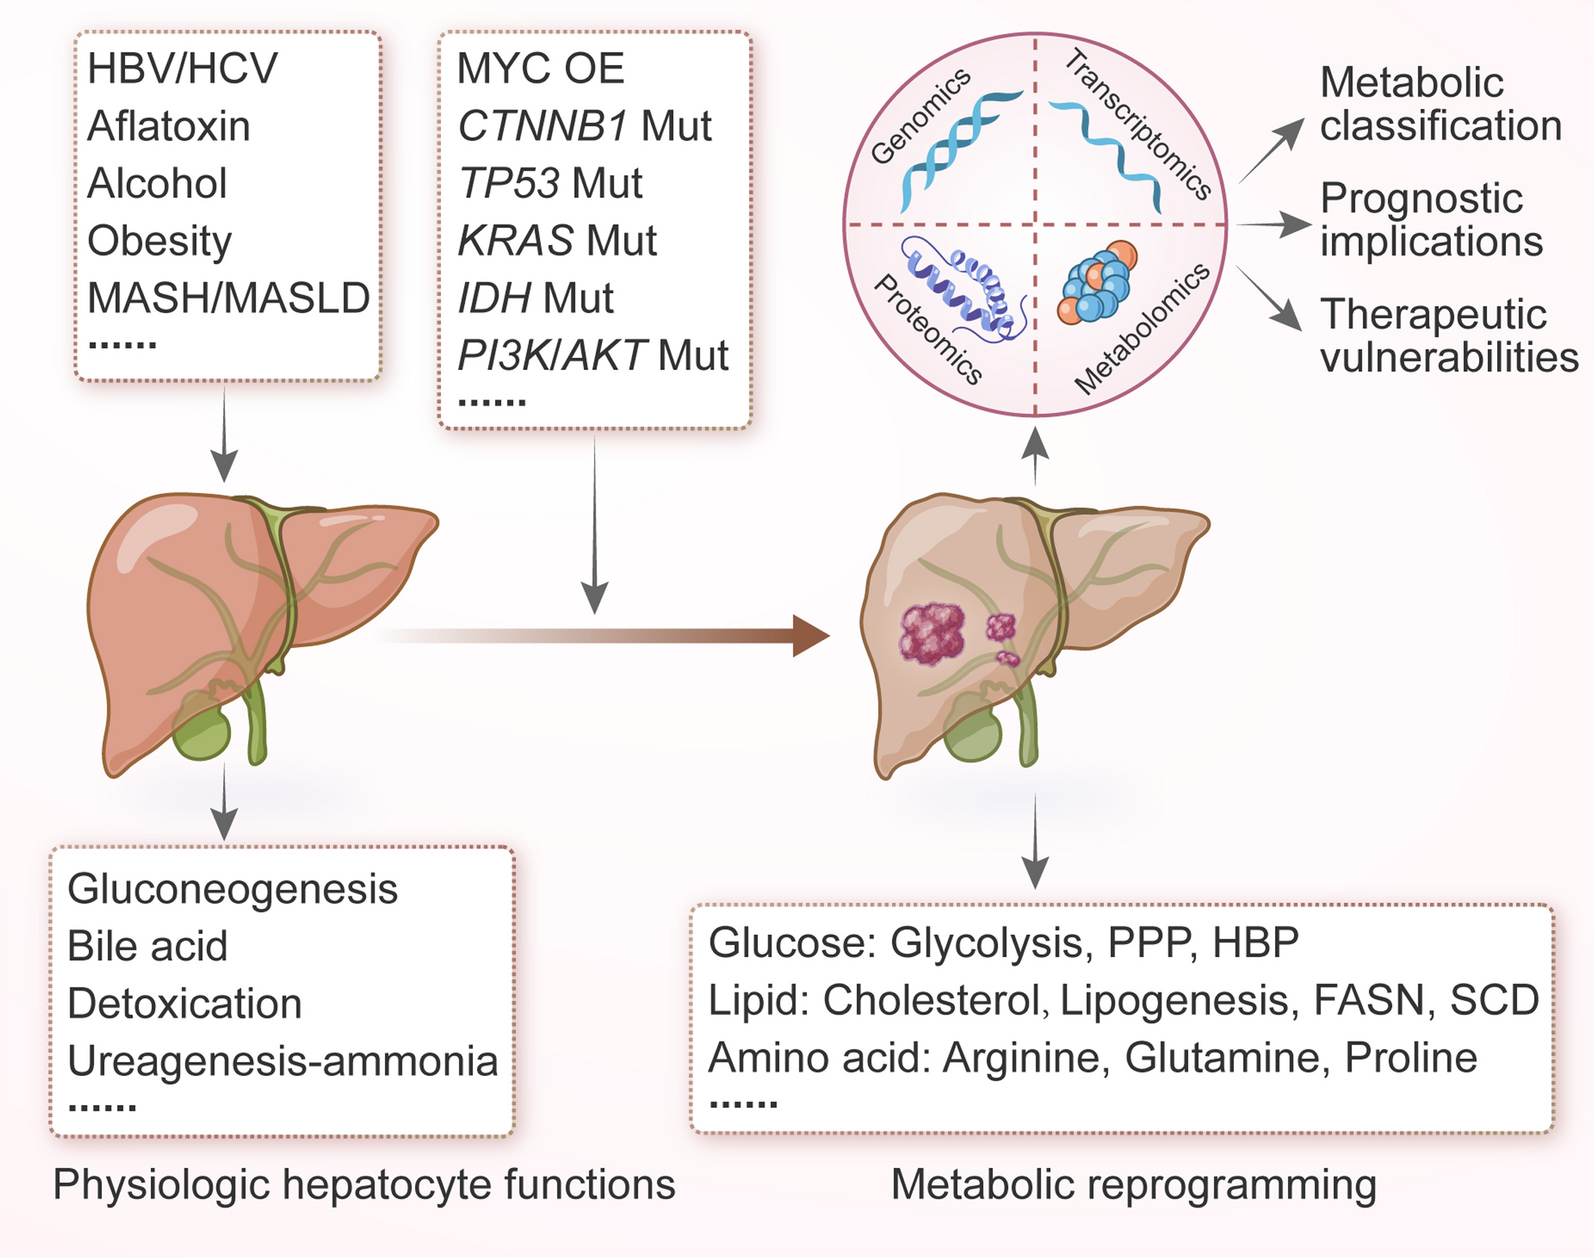 Metabolic reprogramming in the tumor microenvironment of liver cancer